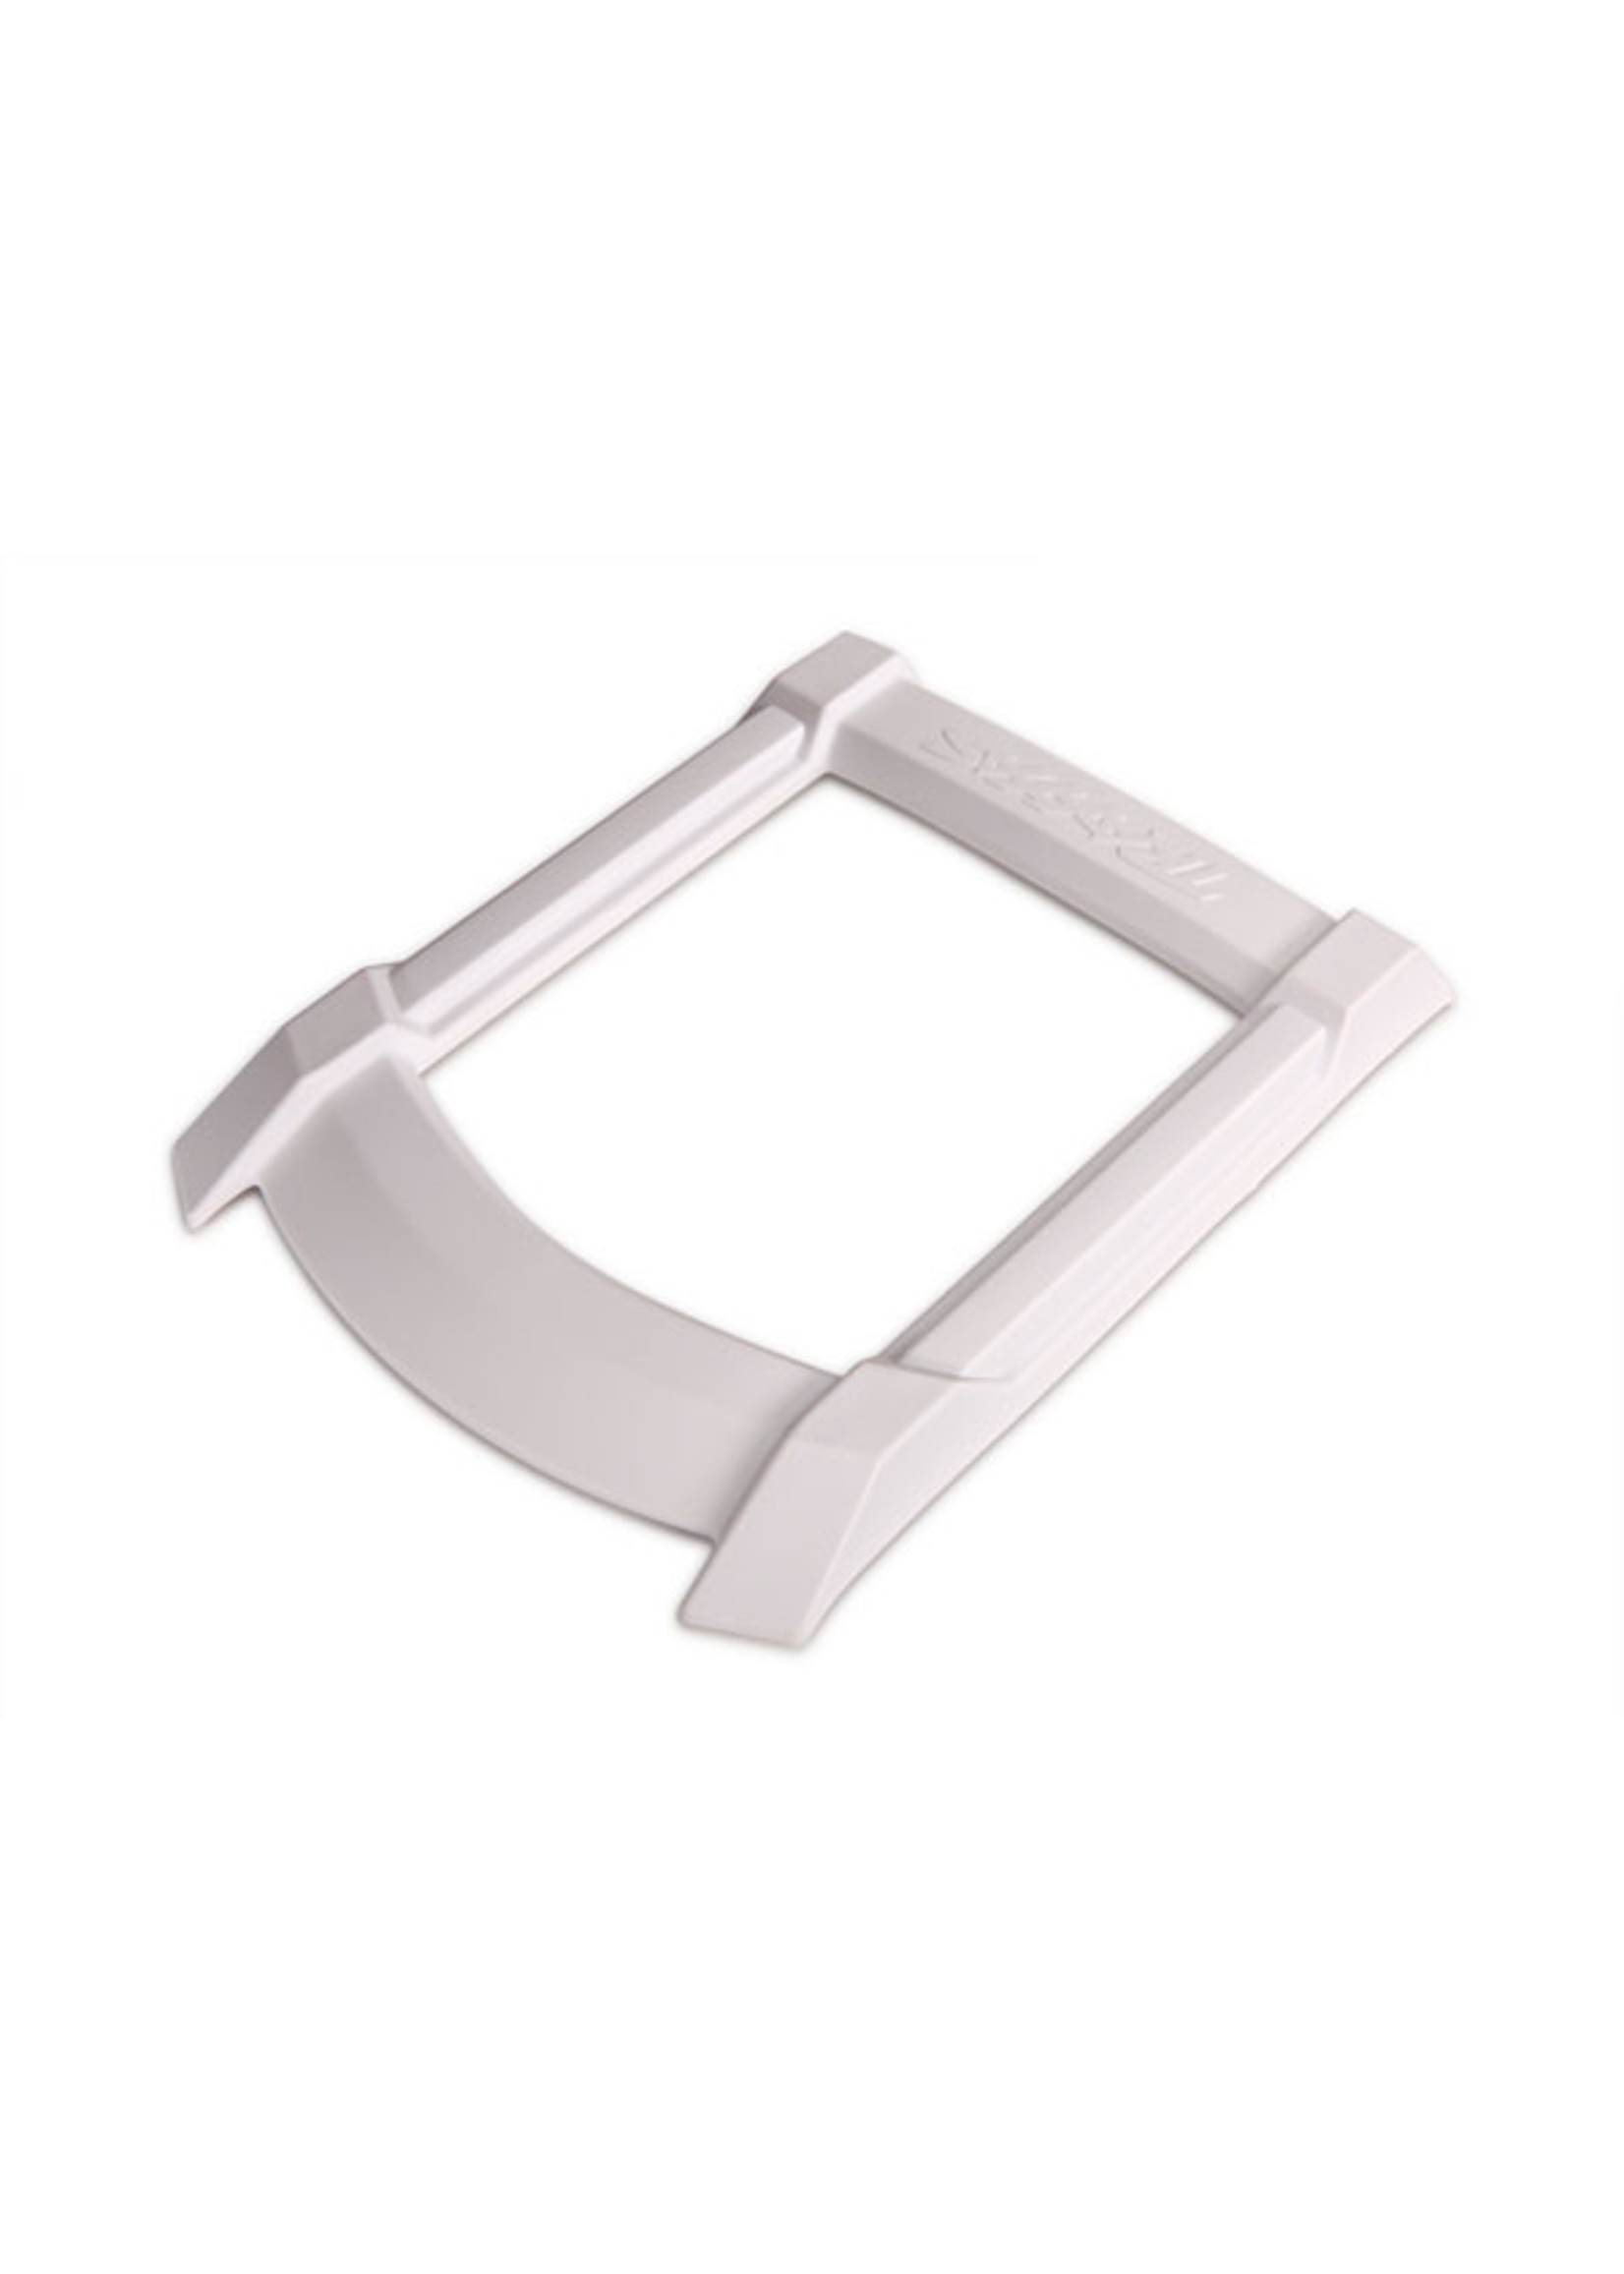 Traxxas 7817A - Skid Plate Roof - White